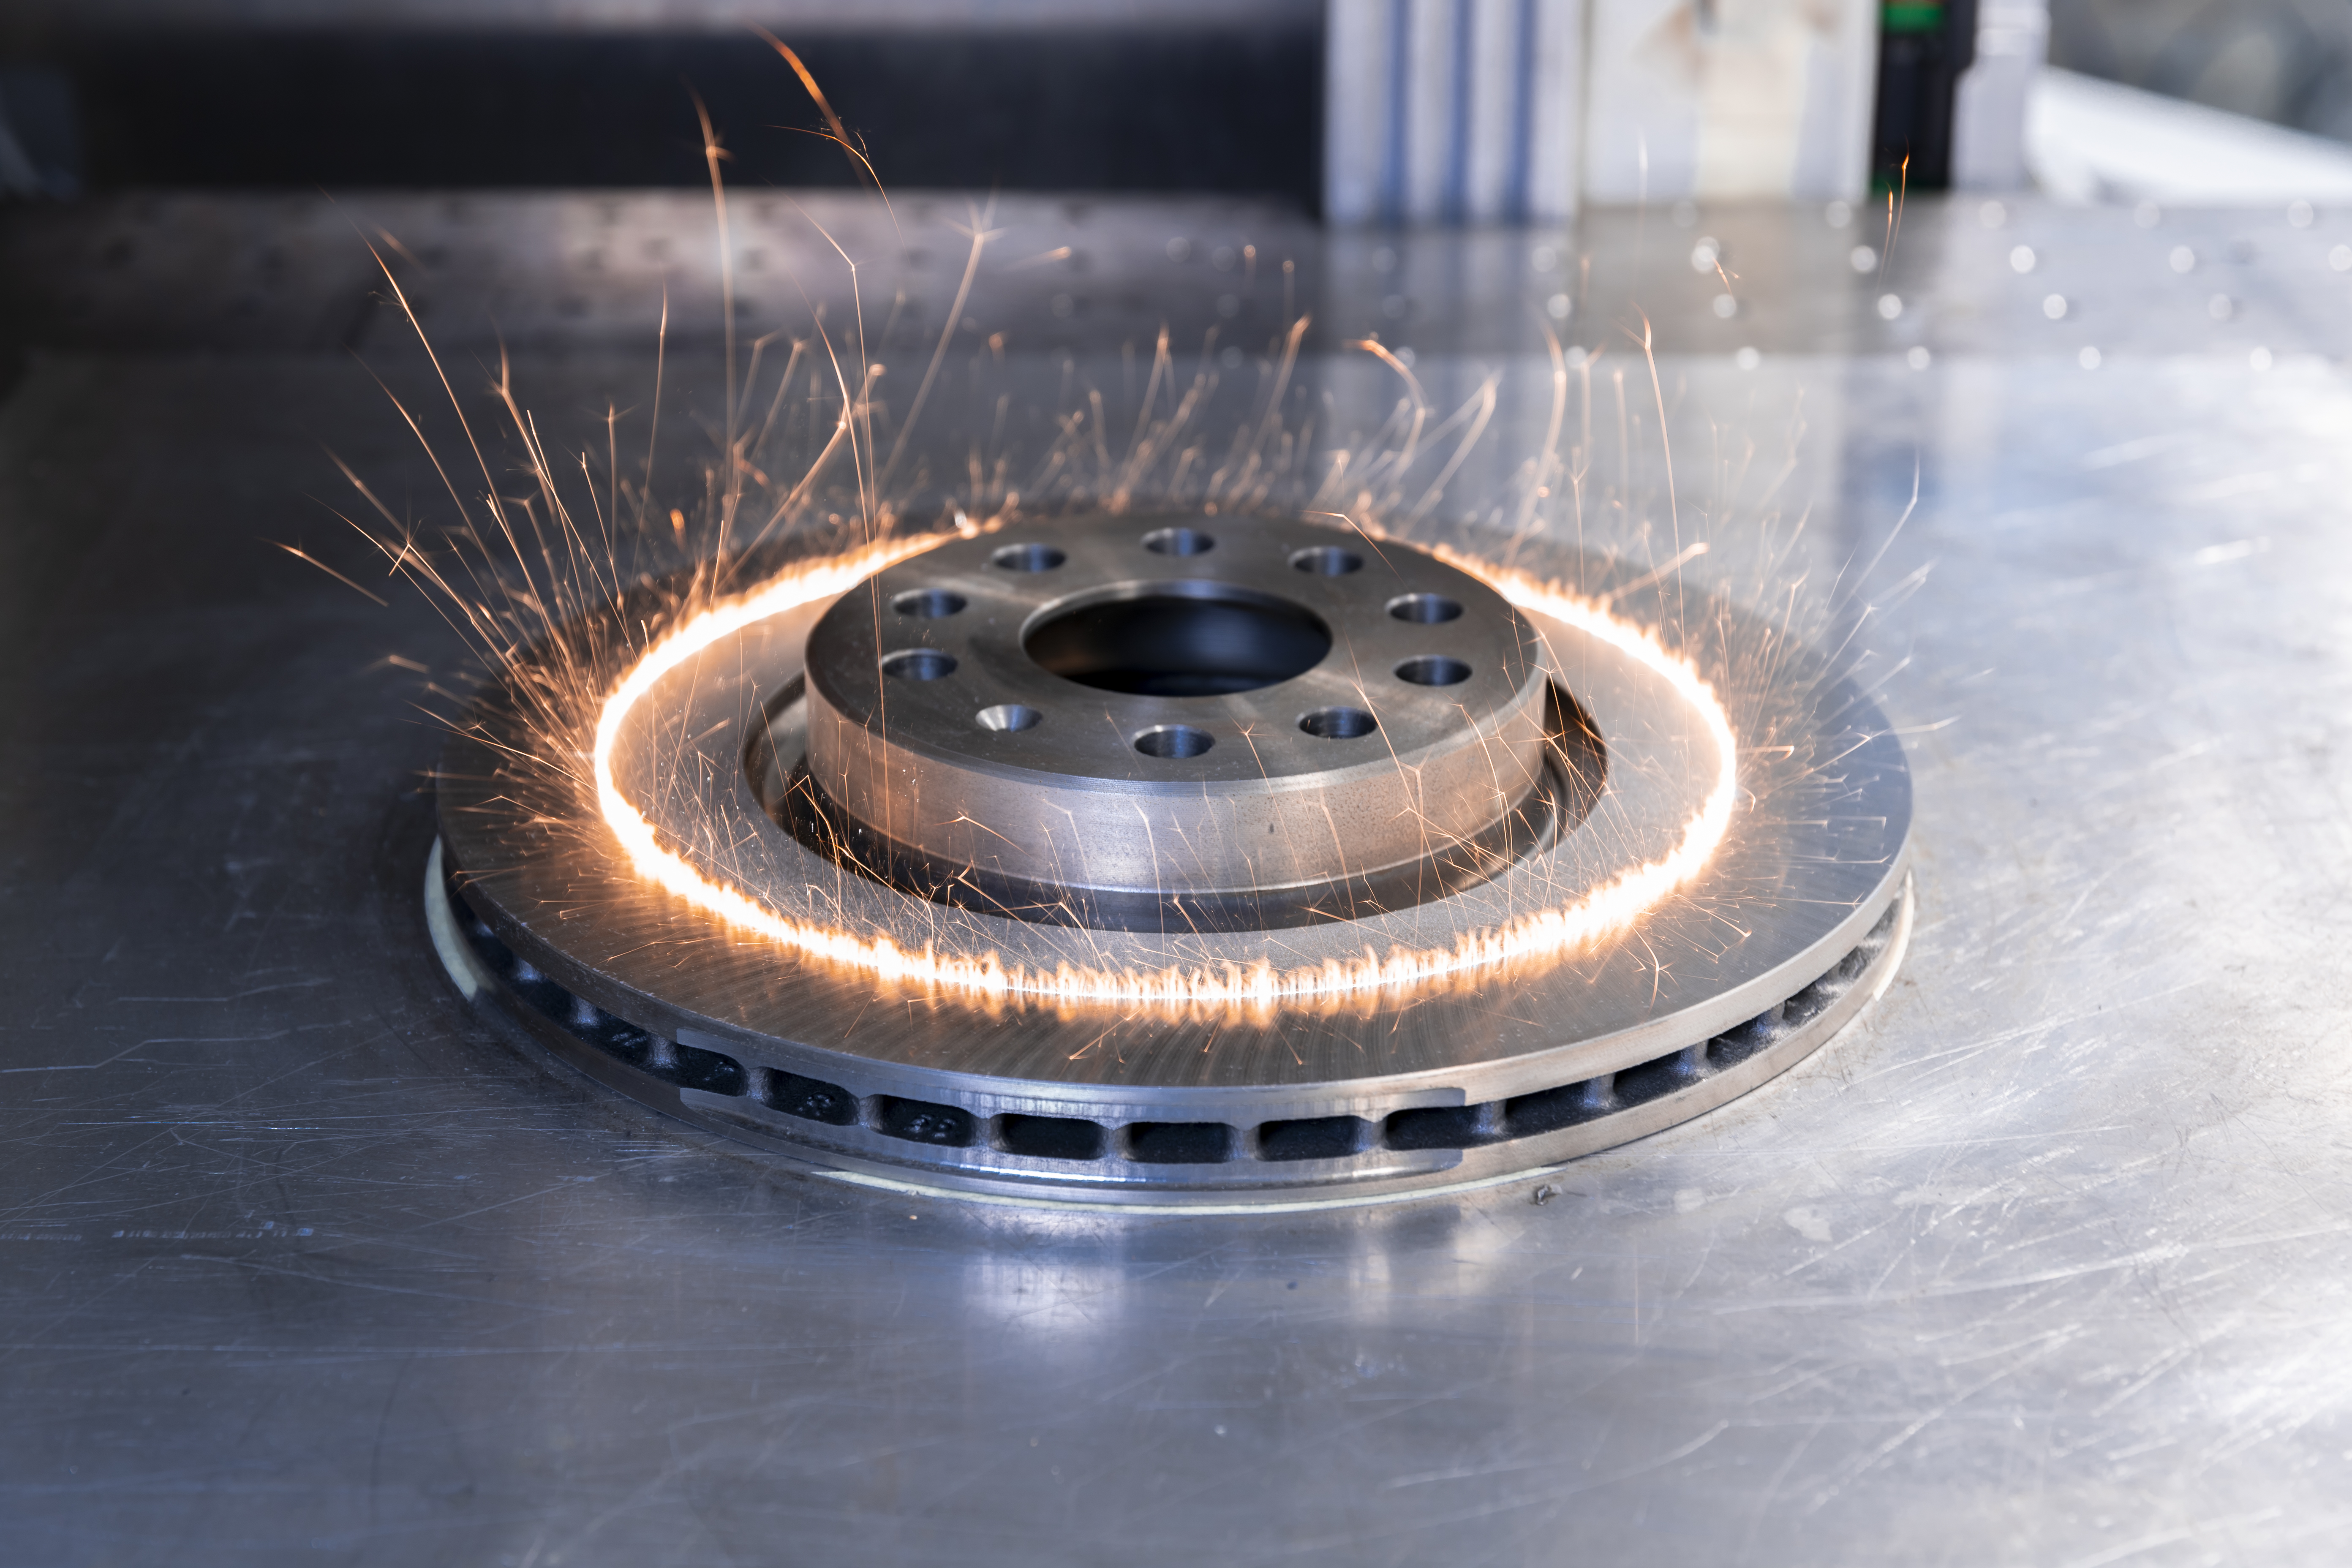 Sandblasting at the speed of light: Fraunhofer IWS uses high-energy light instead of sand grains to clean and roughen – for example the surface of brake discs. For this purpose, researchers developed a laser-based process that realizes cleaning and structuring tasks significantly faster than conventional processes and should result in lower operating costs in series production.